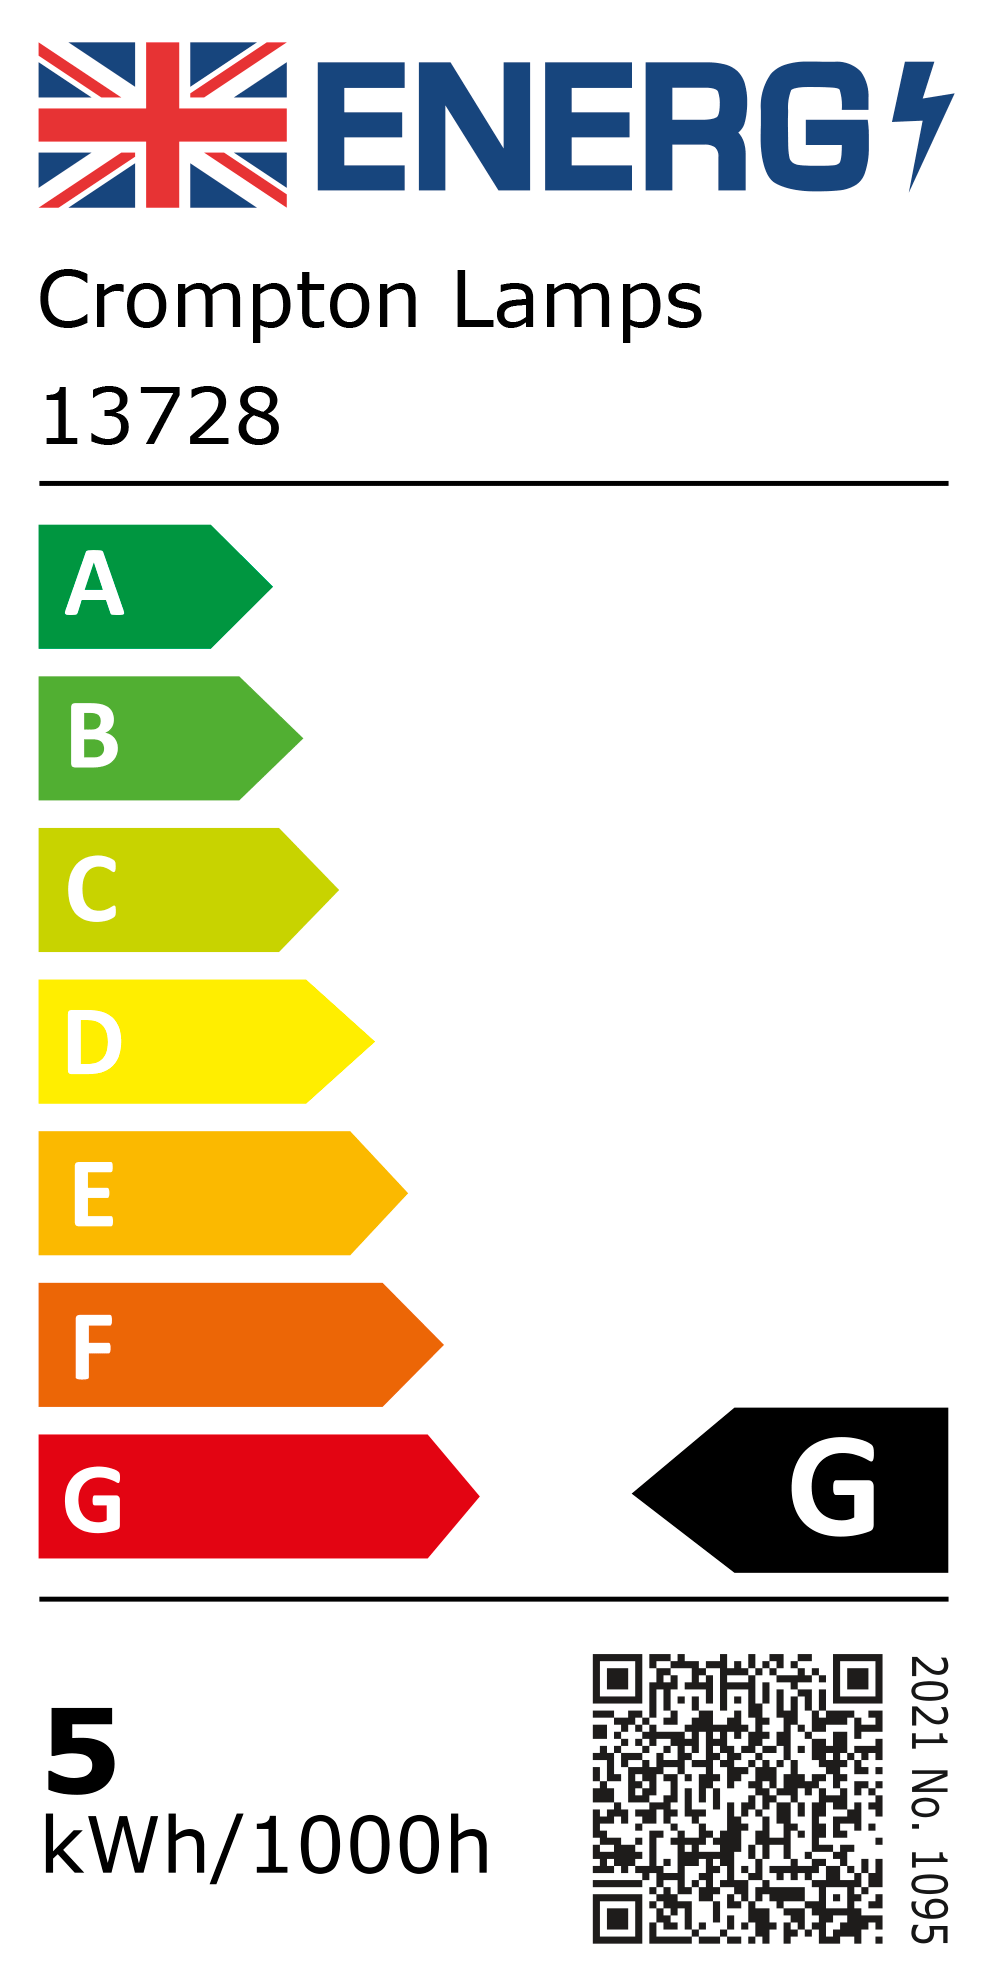 New 2021 Energy Rating Label: Stock Code 13728